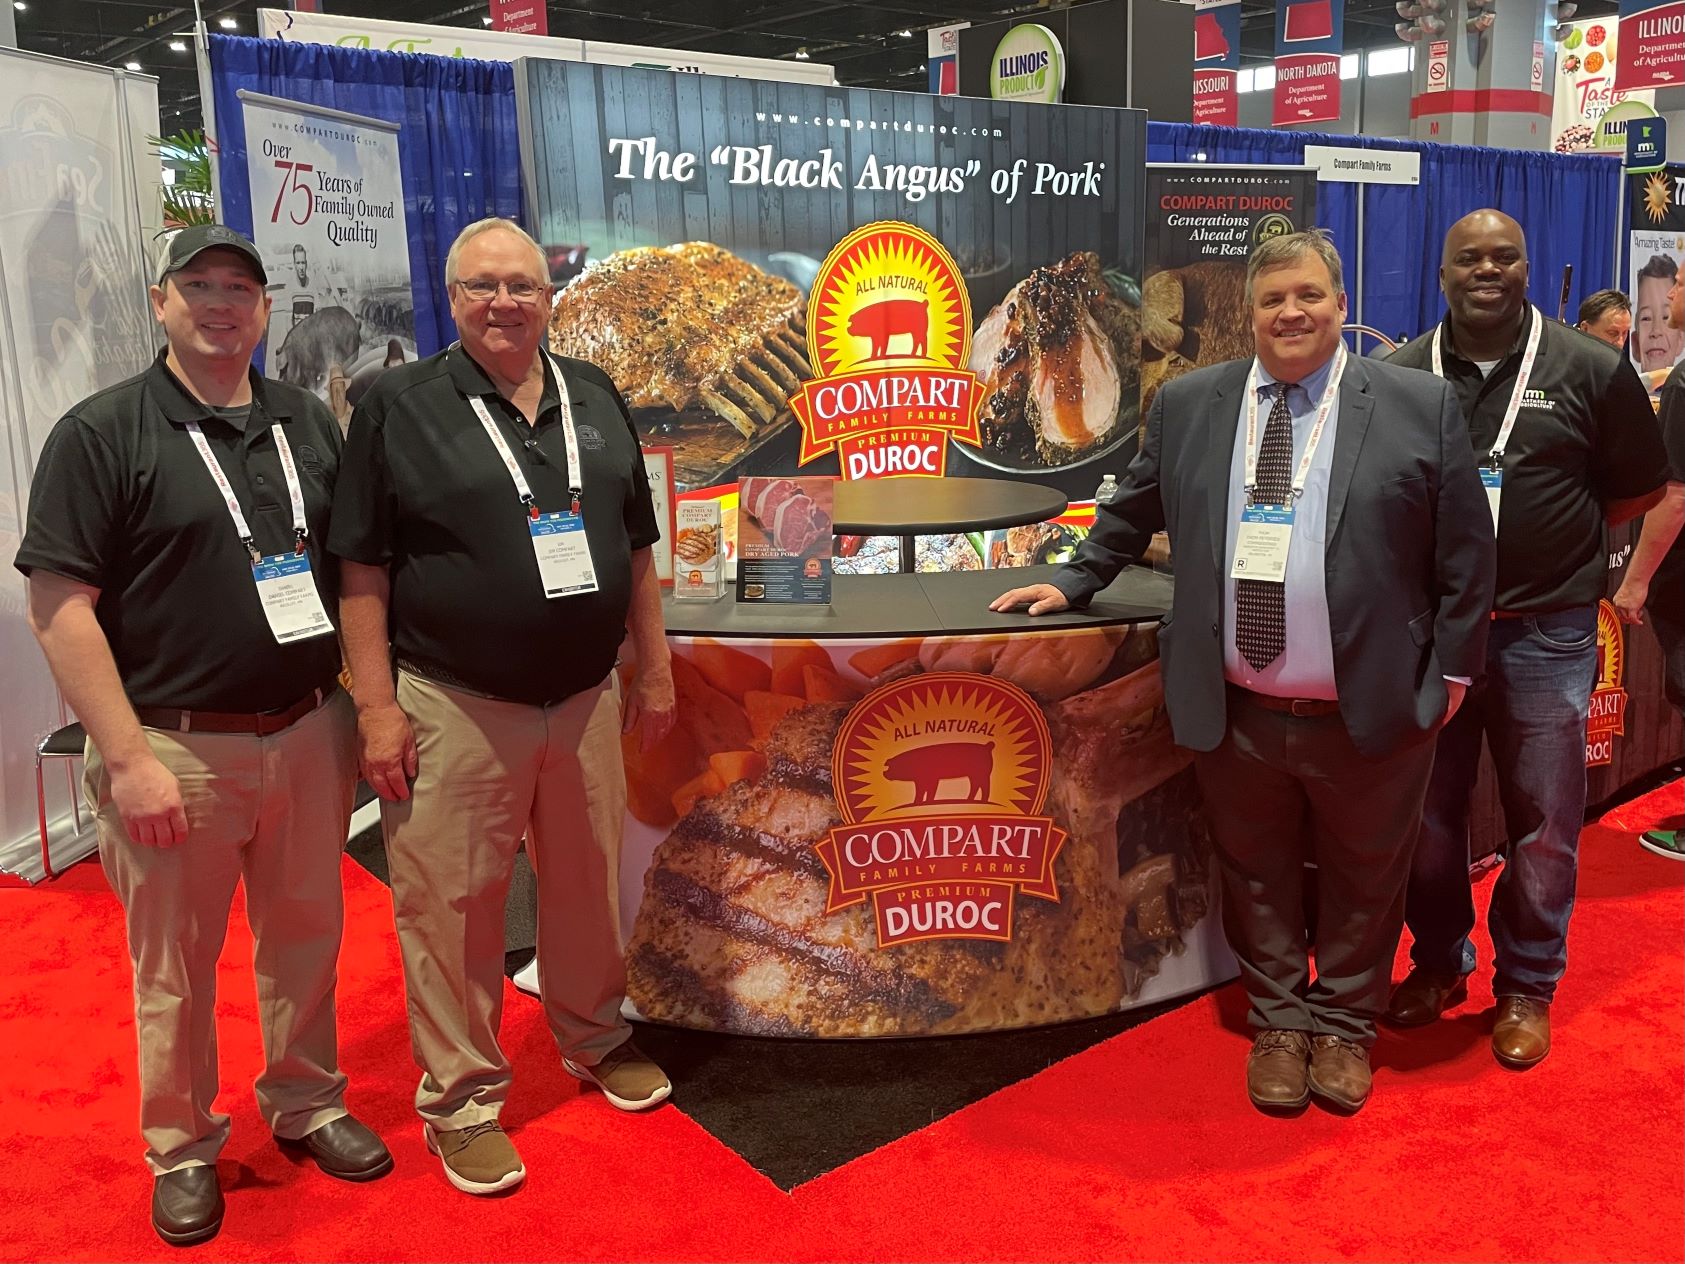 two men standing on each side of the Compart Duroc exhibit at a trade show